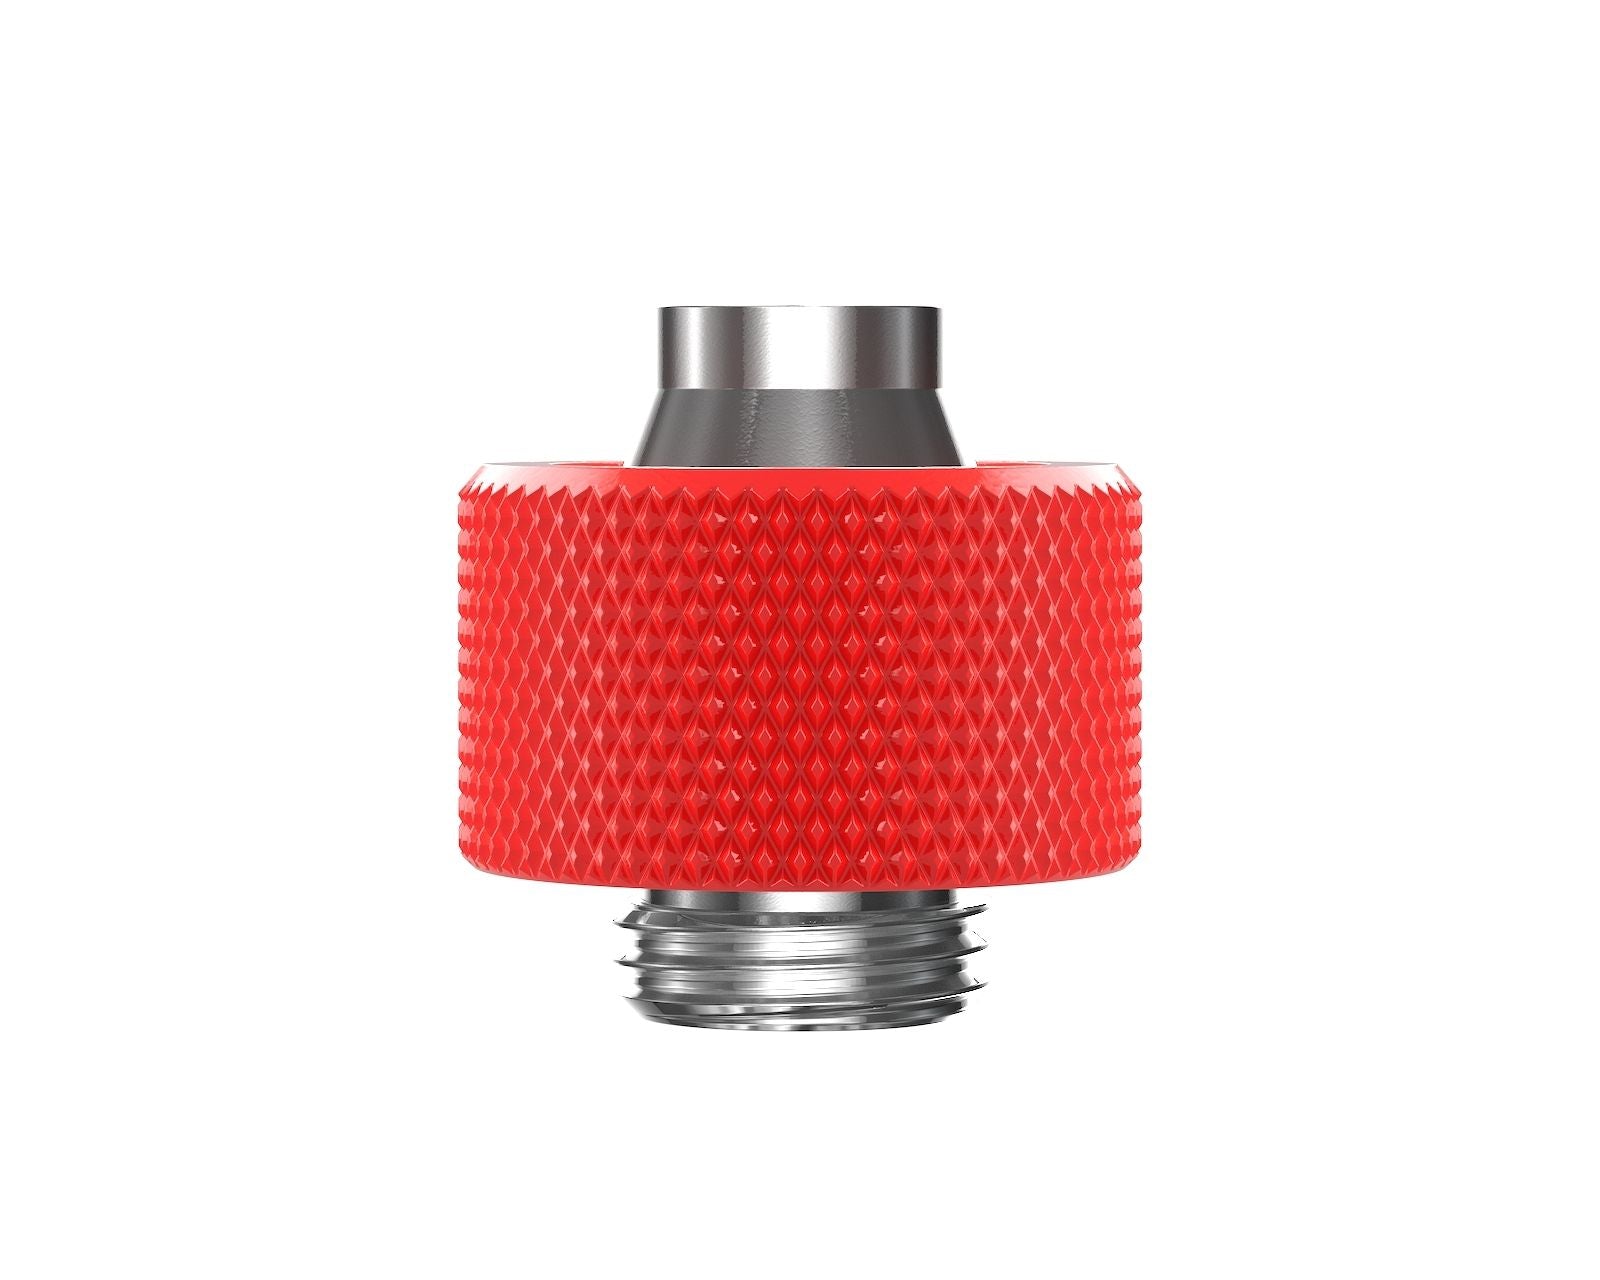 PrimoChill SecureFit SX - Premium Compression Fitting For 7/16in ID x 5/8in OD Flexible Tubing (F-SFSX758) - Available in 20+ Colors, Custom Watercooling Loop Ready - UV Red